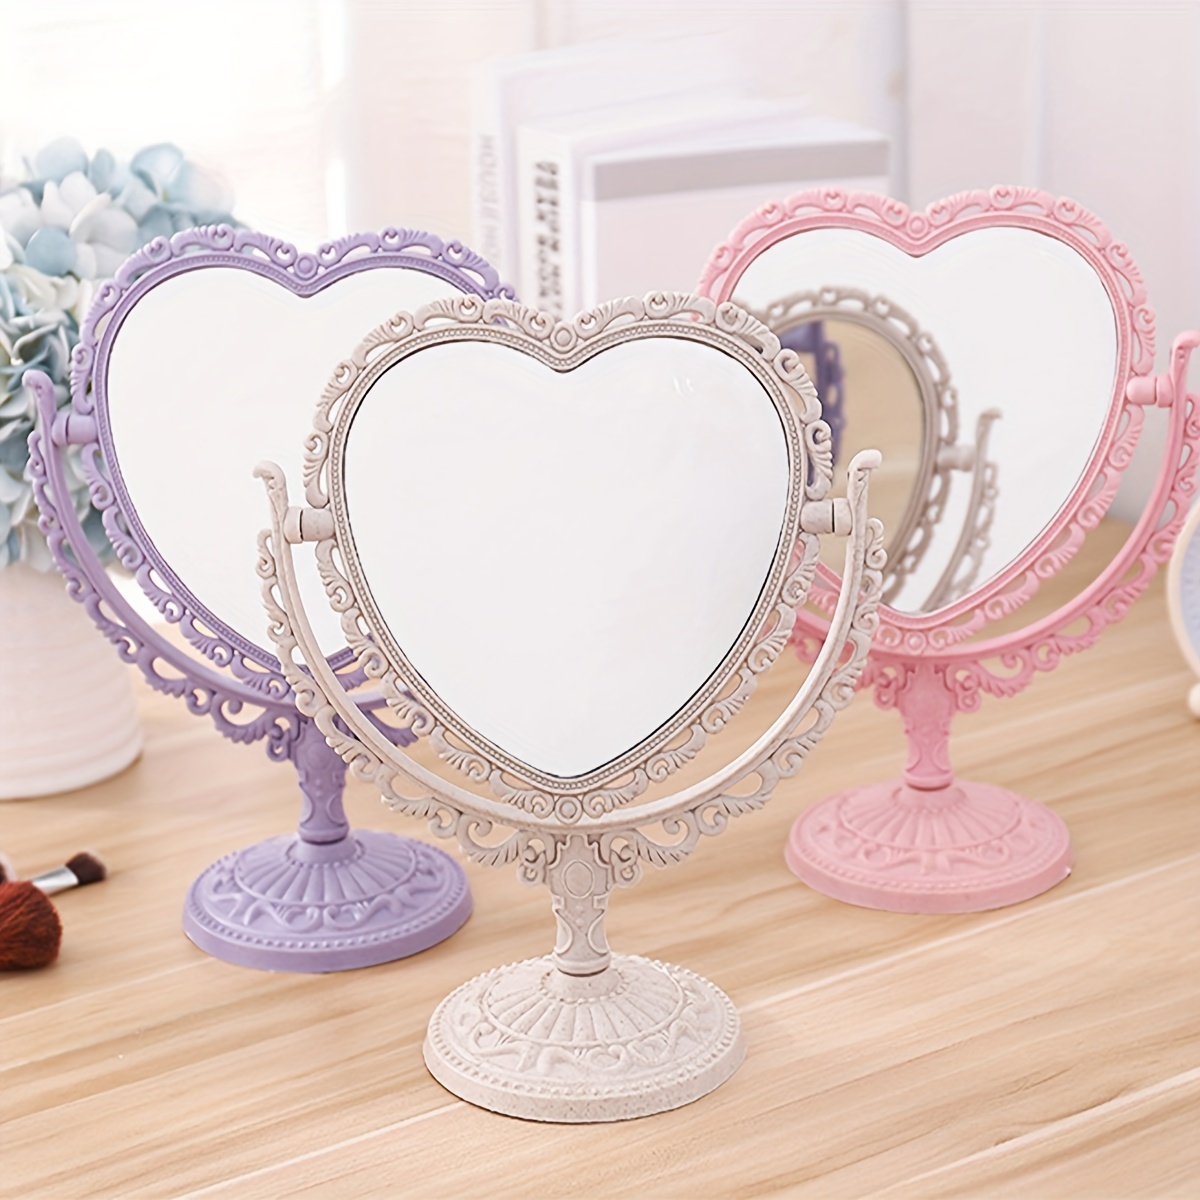 

1pc Vintage Dual-sided 360° Rotatable Desk Mirror, Heart-shaped Vanity Makeup Mirror, Princess Style For Bedroom Dorm Room Decor